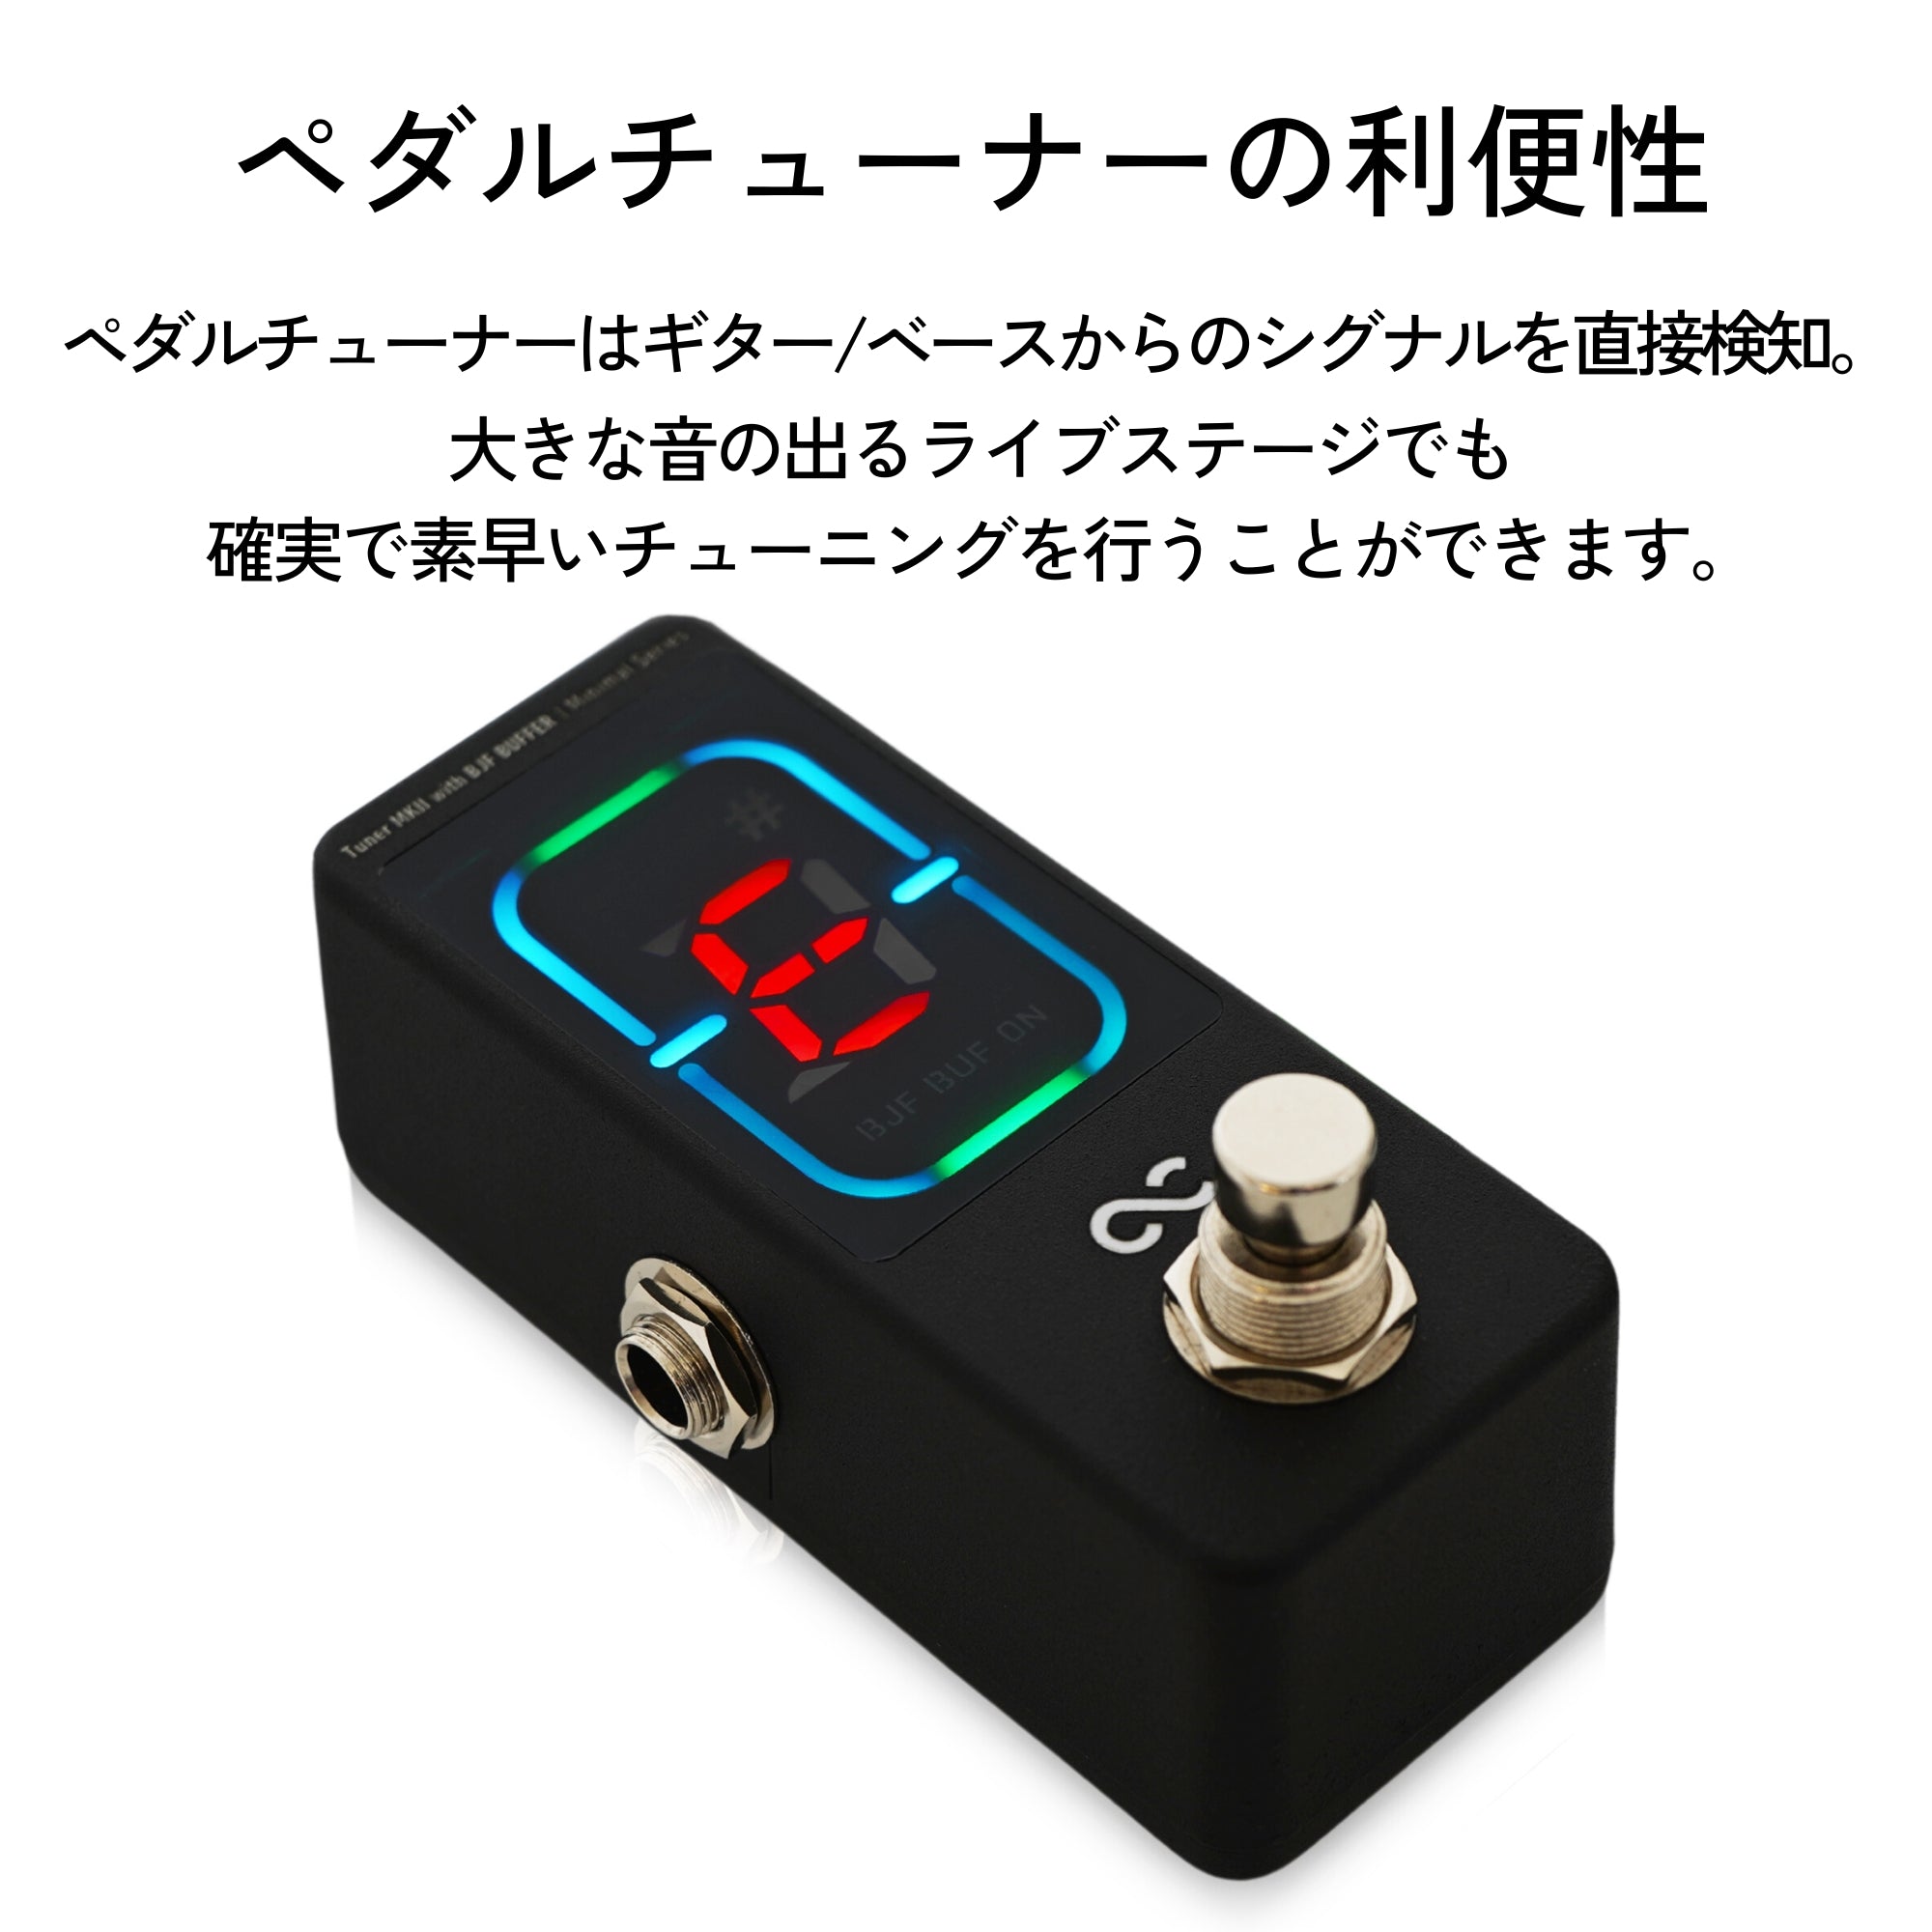 One Control Tuner with BJF BUFFER チューナー